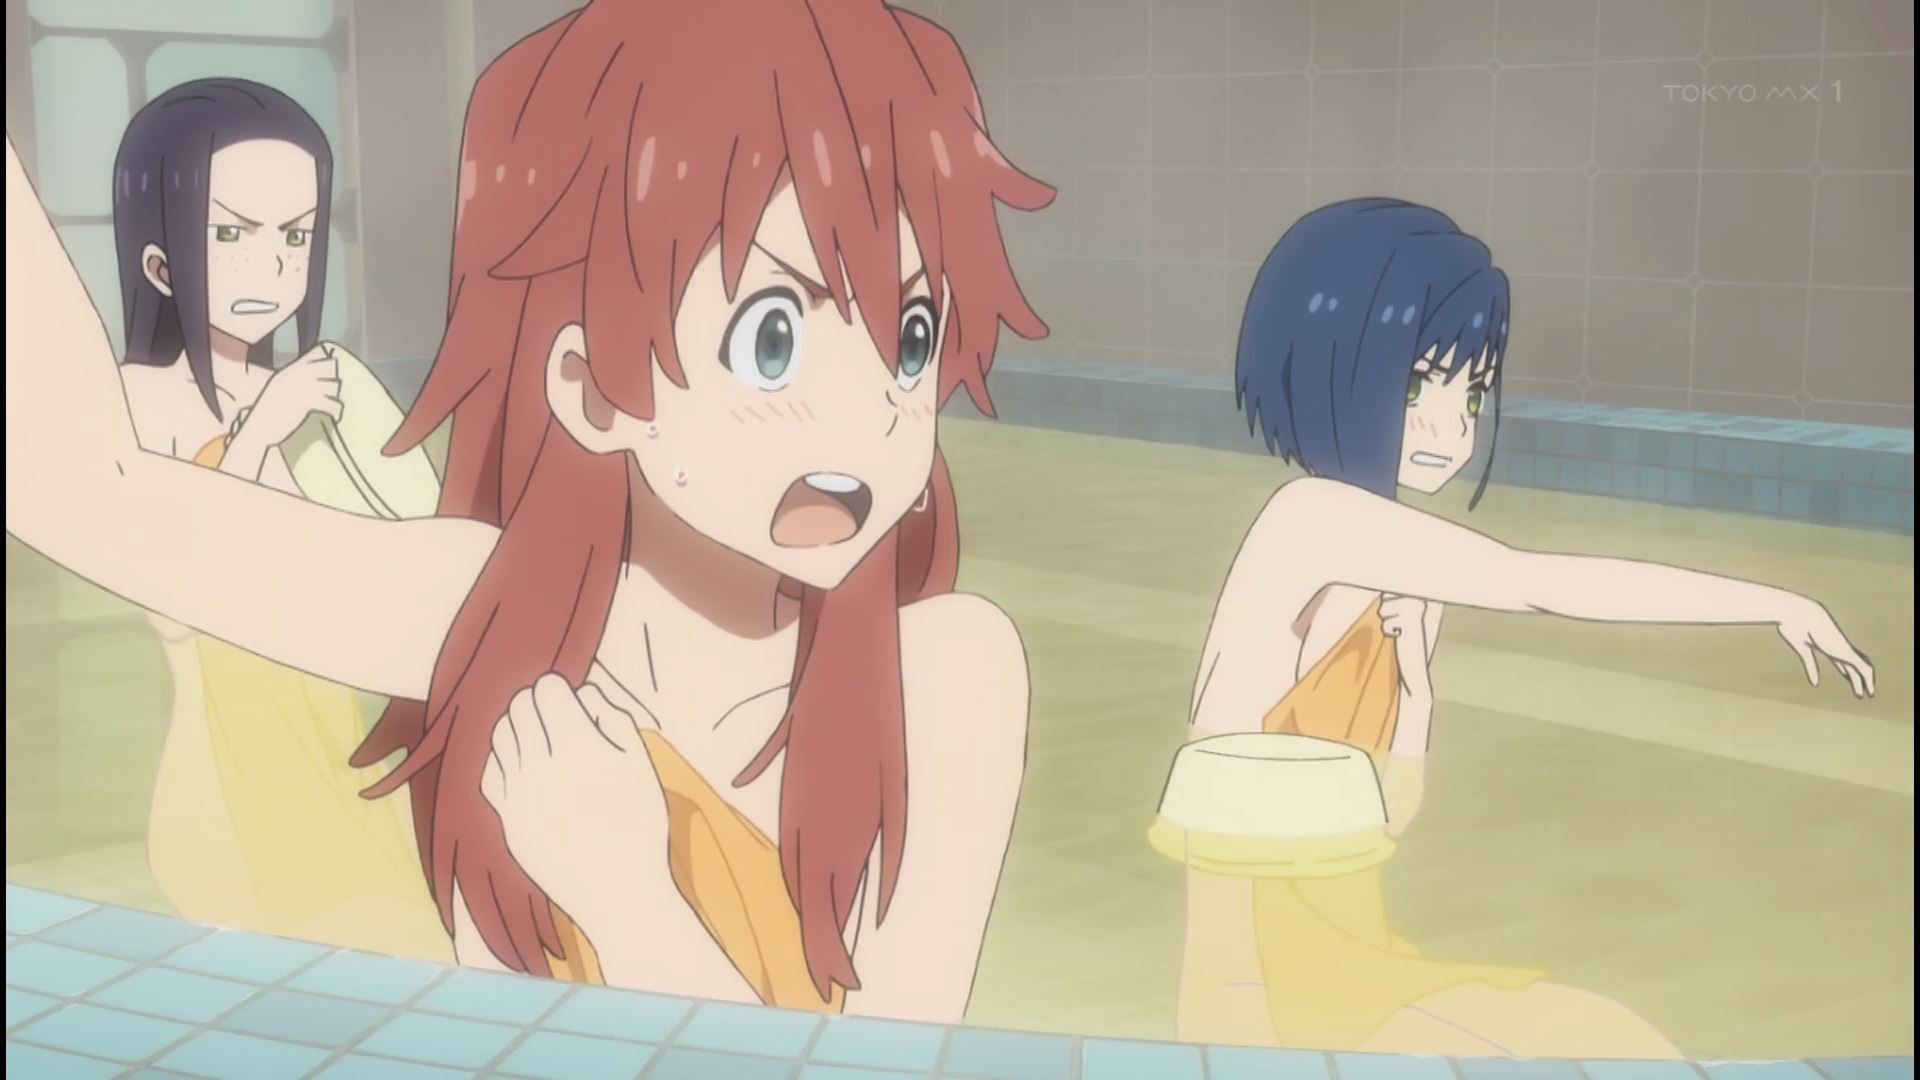 such as the bath scene and the girl's suit melts in anime ' darling in the Franc kiss ' 8 story! 23